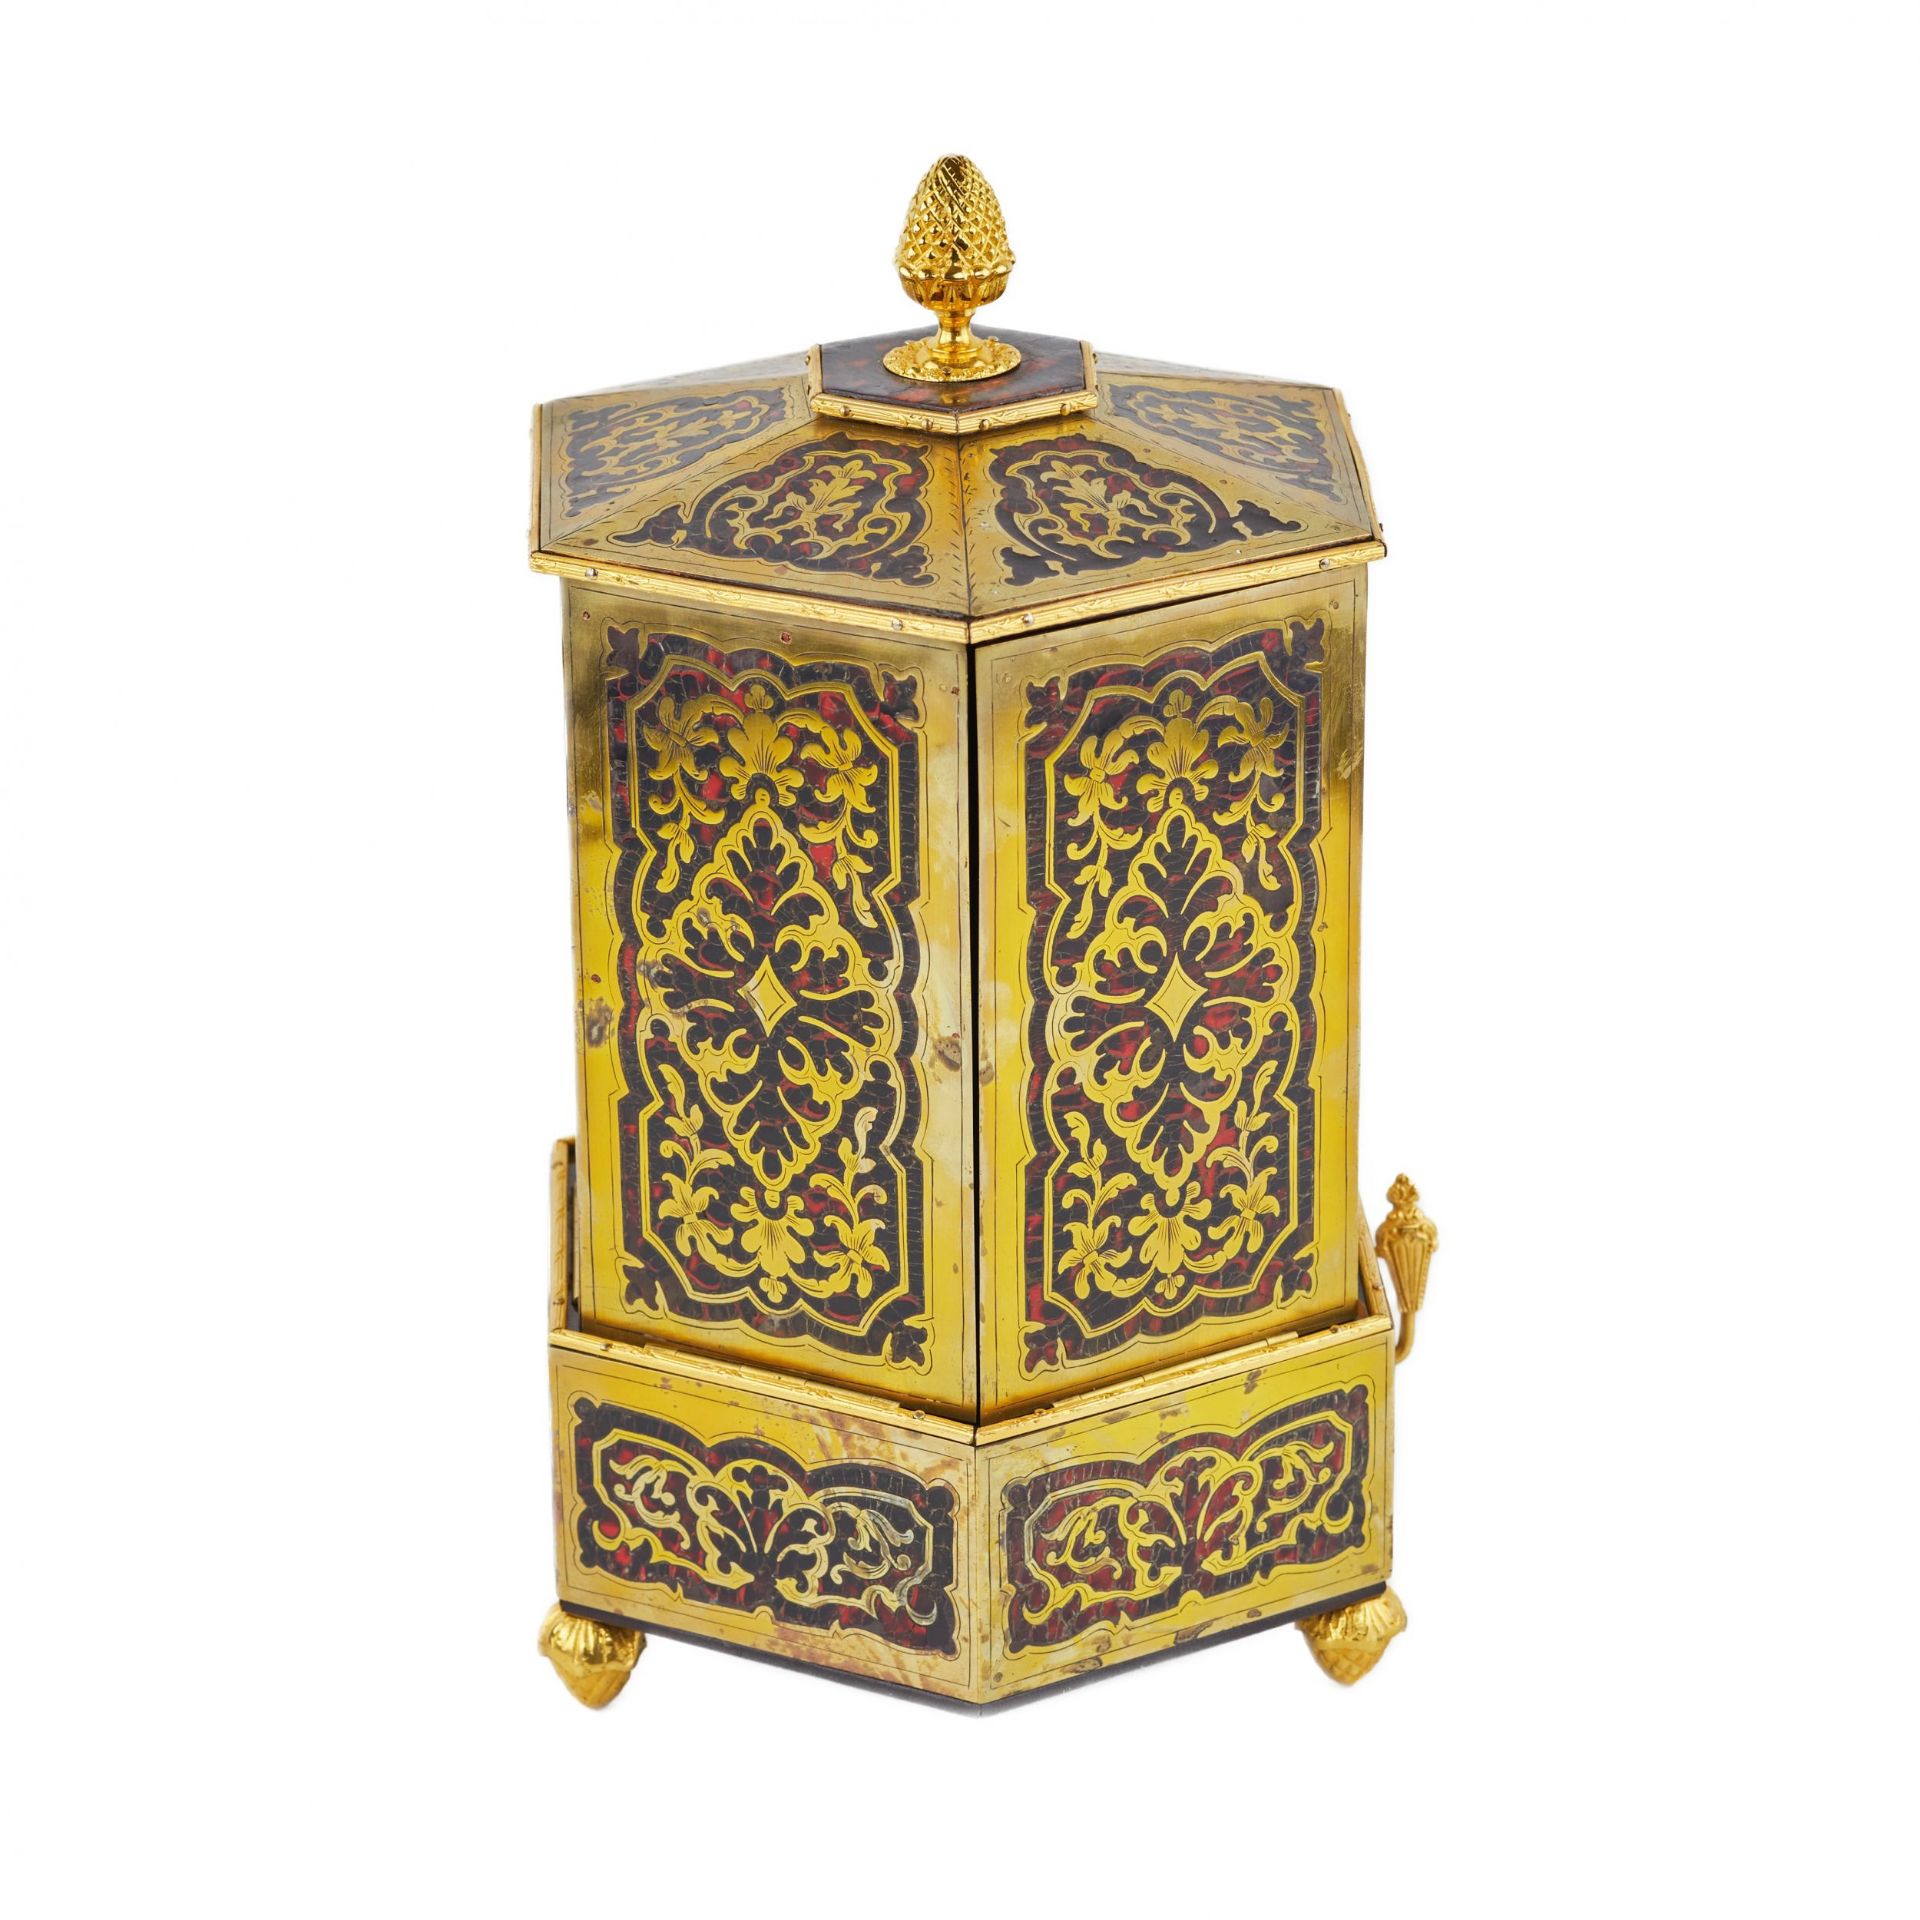 Unique cigar box in the form of a Pagoda with a flap opening mechanism. 19th century. - Image 2 of 5